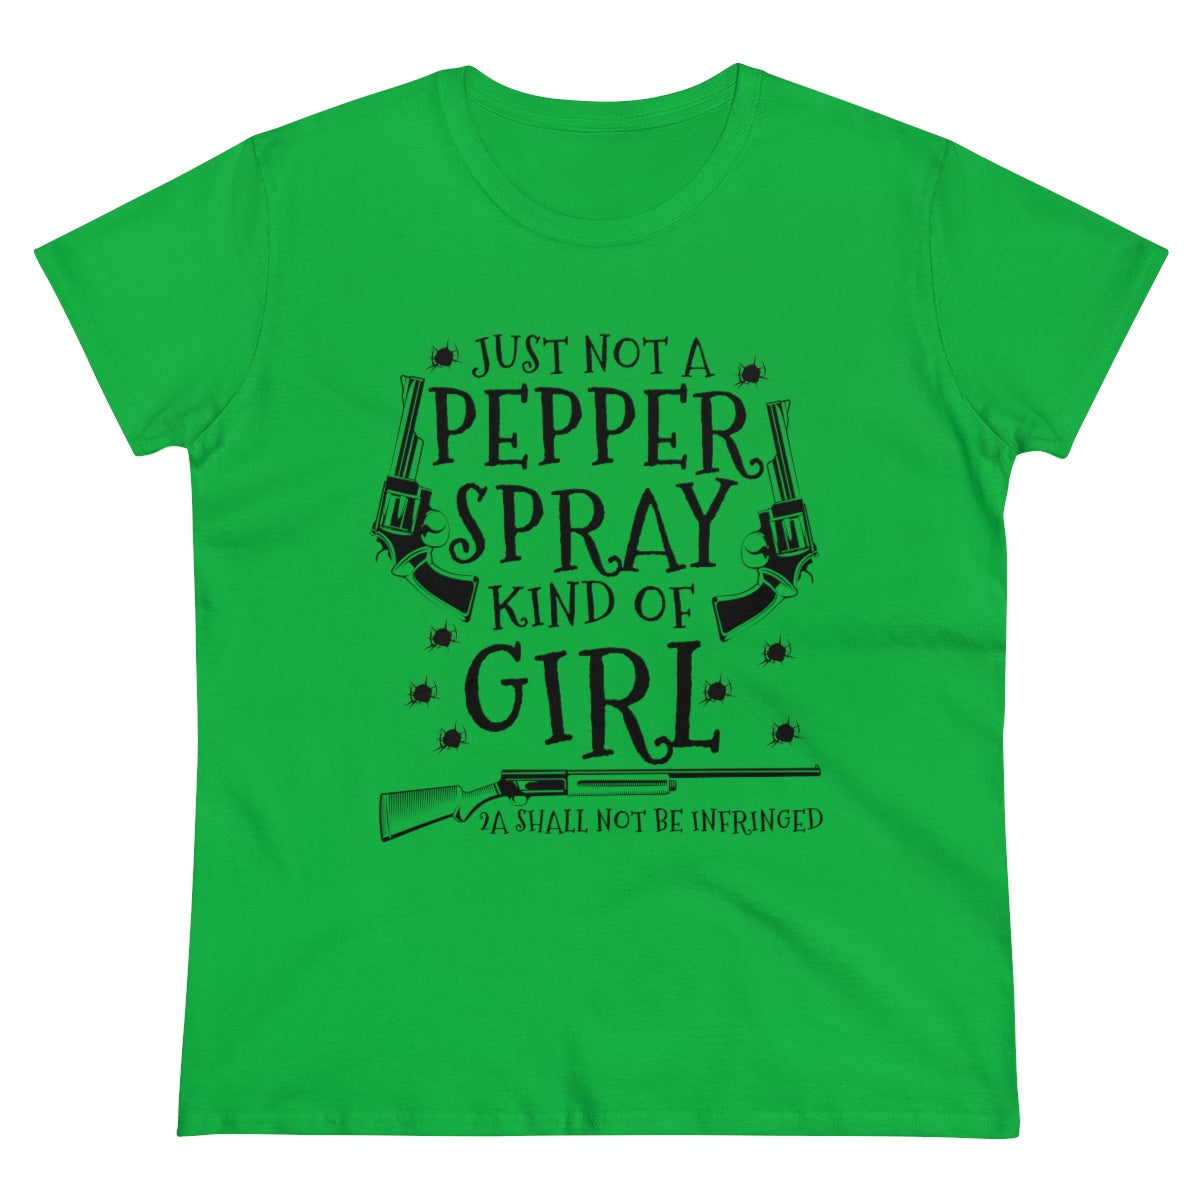 Just Not A Pepper Spray Kind of Girl | Women's Tee - Rise of The New Media